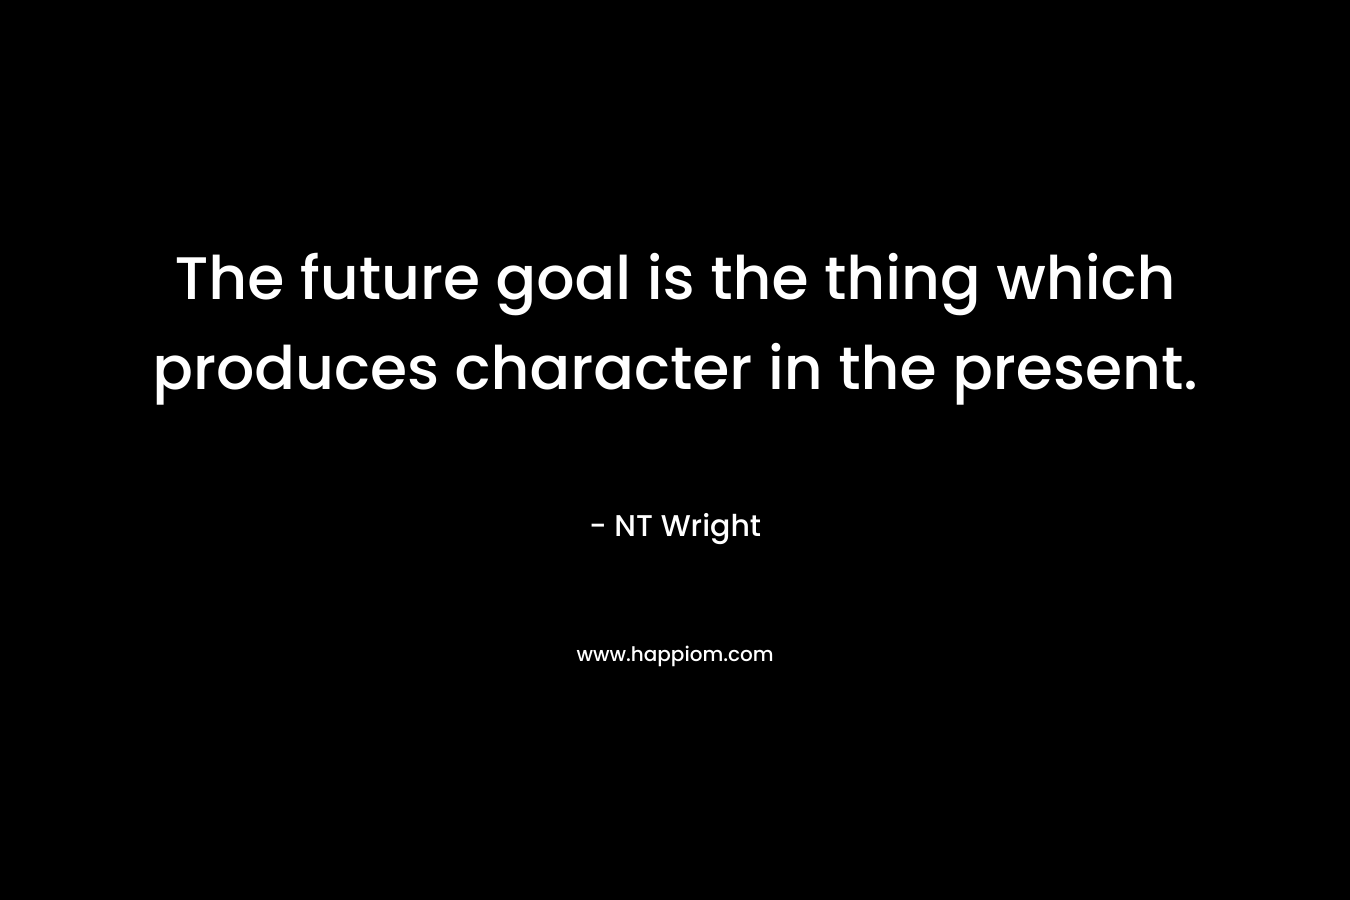 The future goal is the thing which produces character in the present.